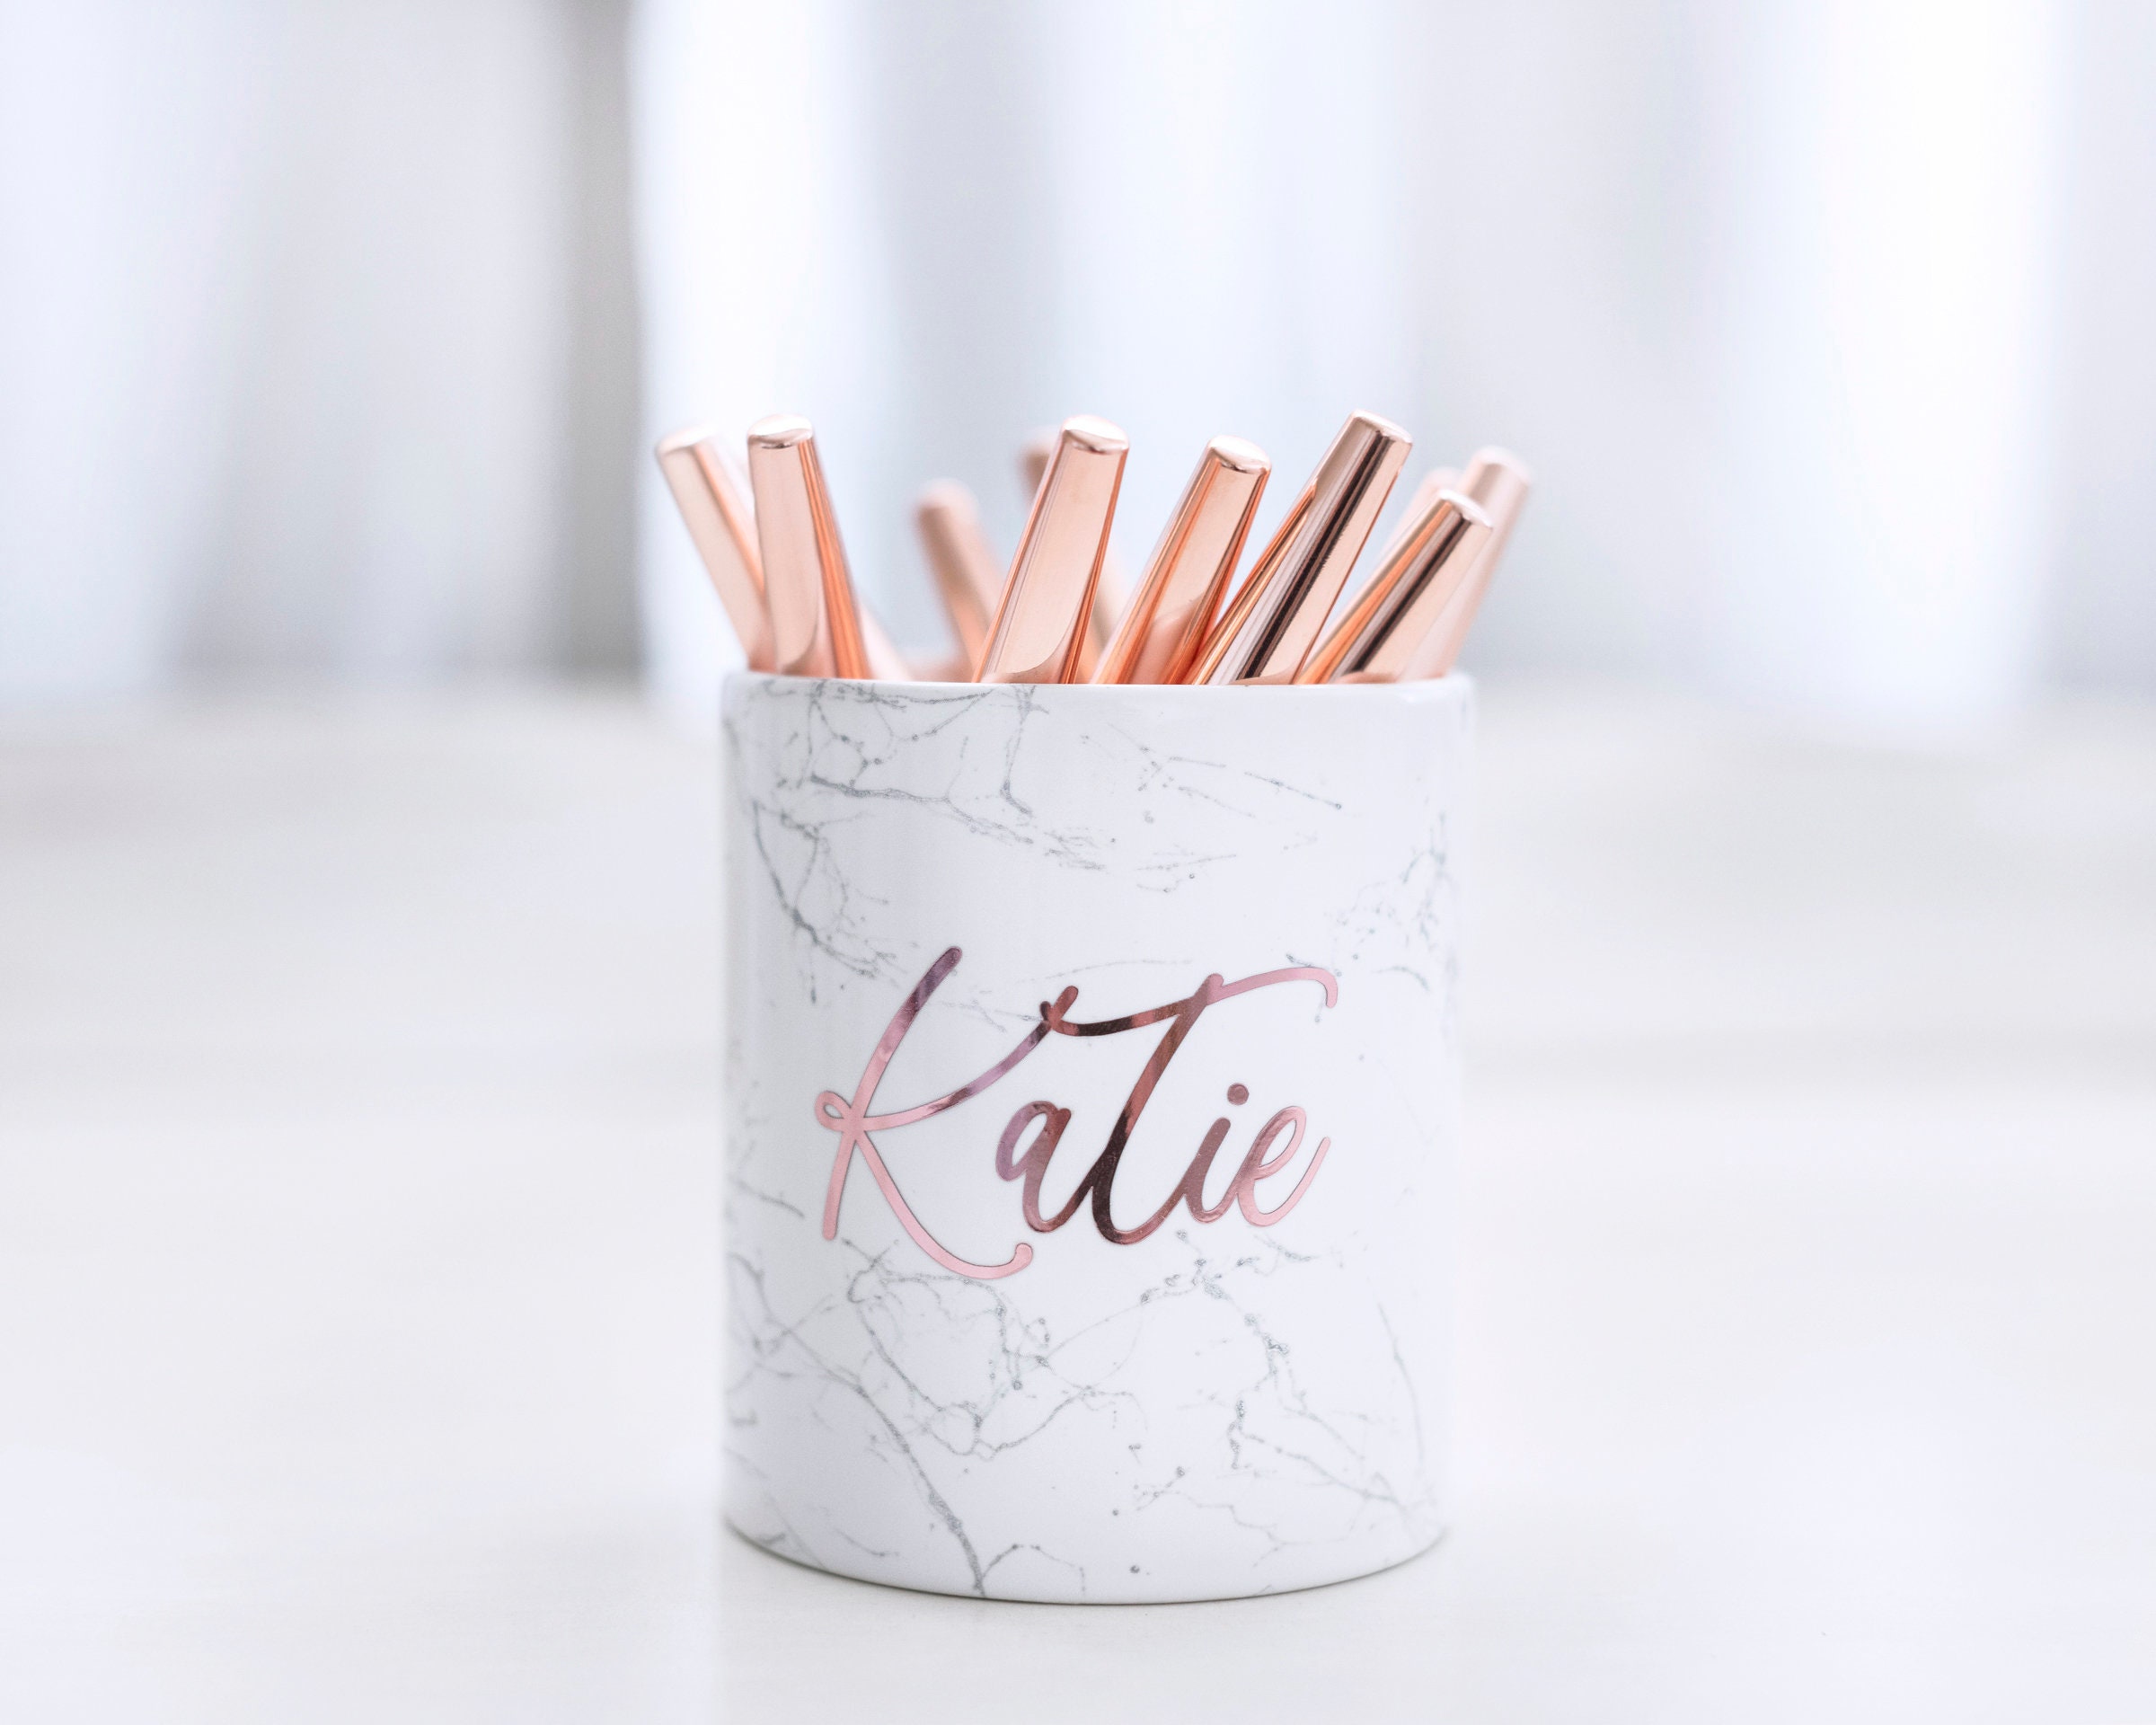 Rose Gold Desk Organizer and Storage for Your Accessories - Cute